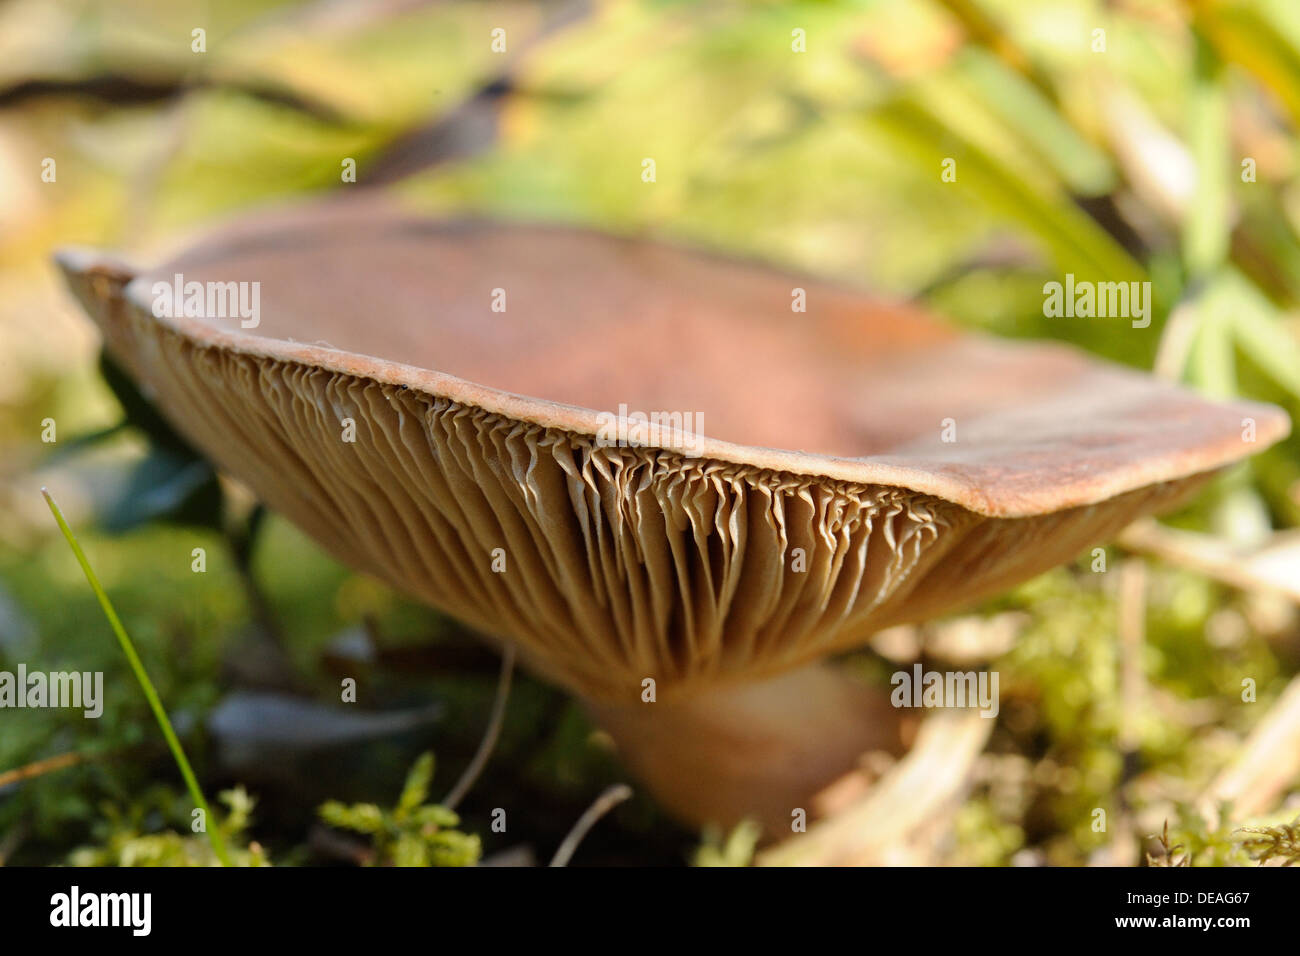 A brown inedible milk mushroom in the forest Stock Photo